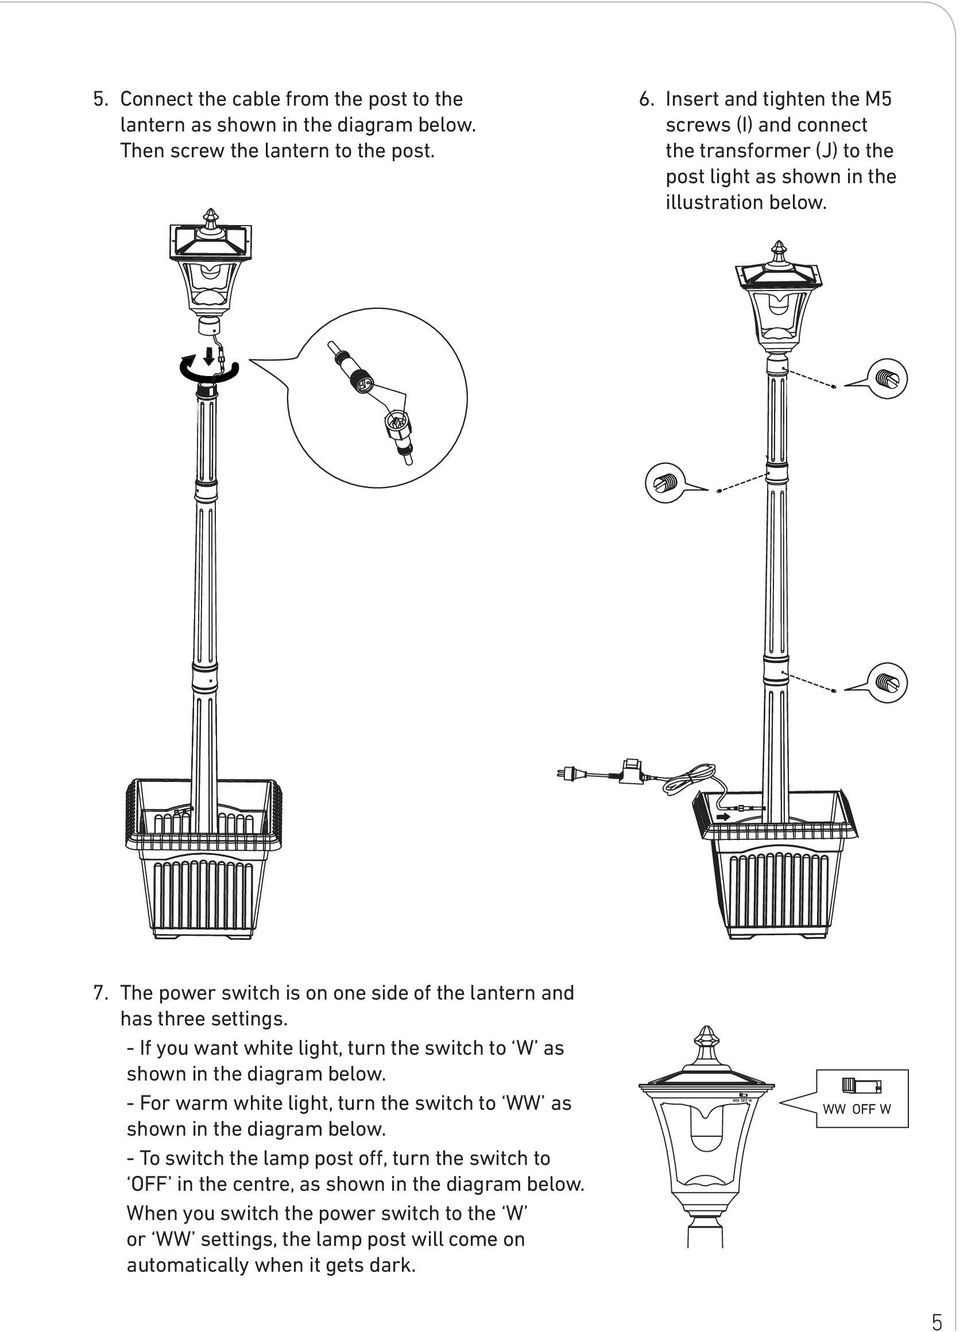 The power switch is on one side of the lantern and has three settings. - If you want white light, turn the switch to W as shown in the diagram below.